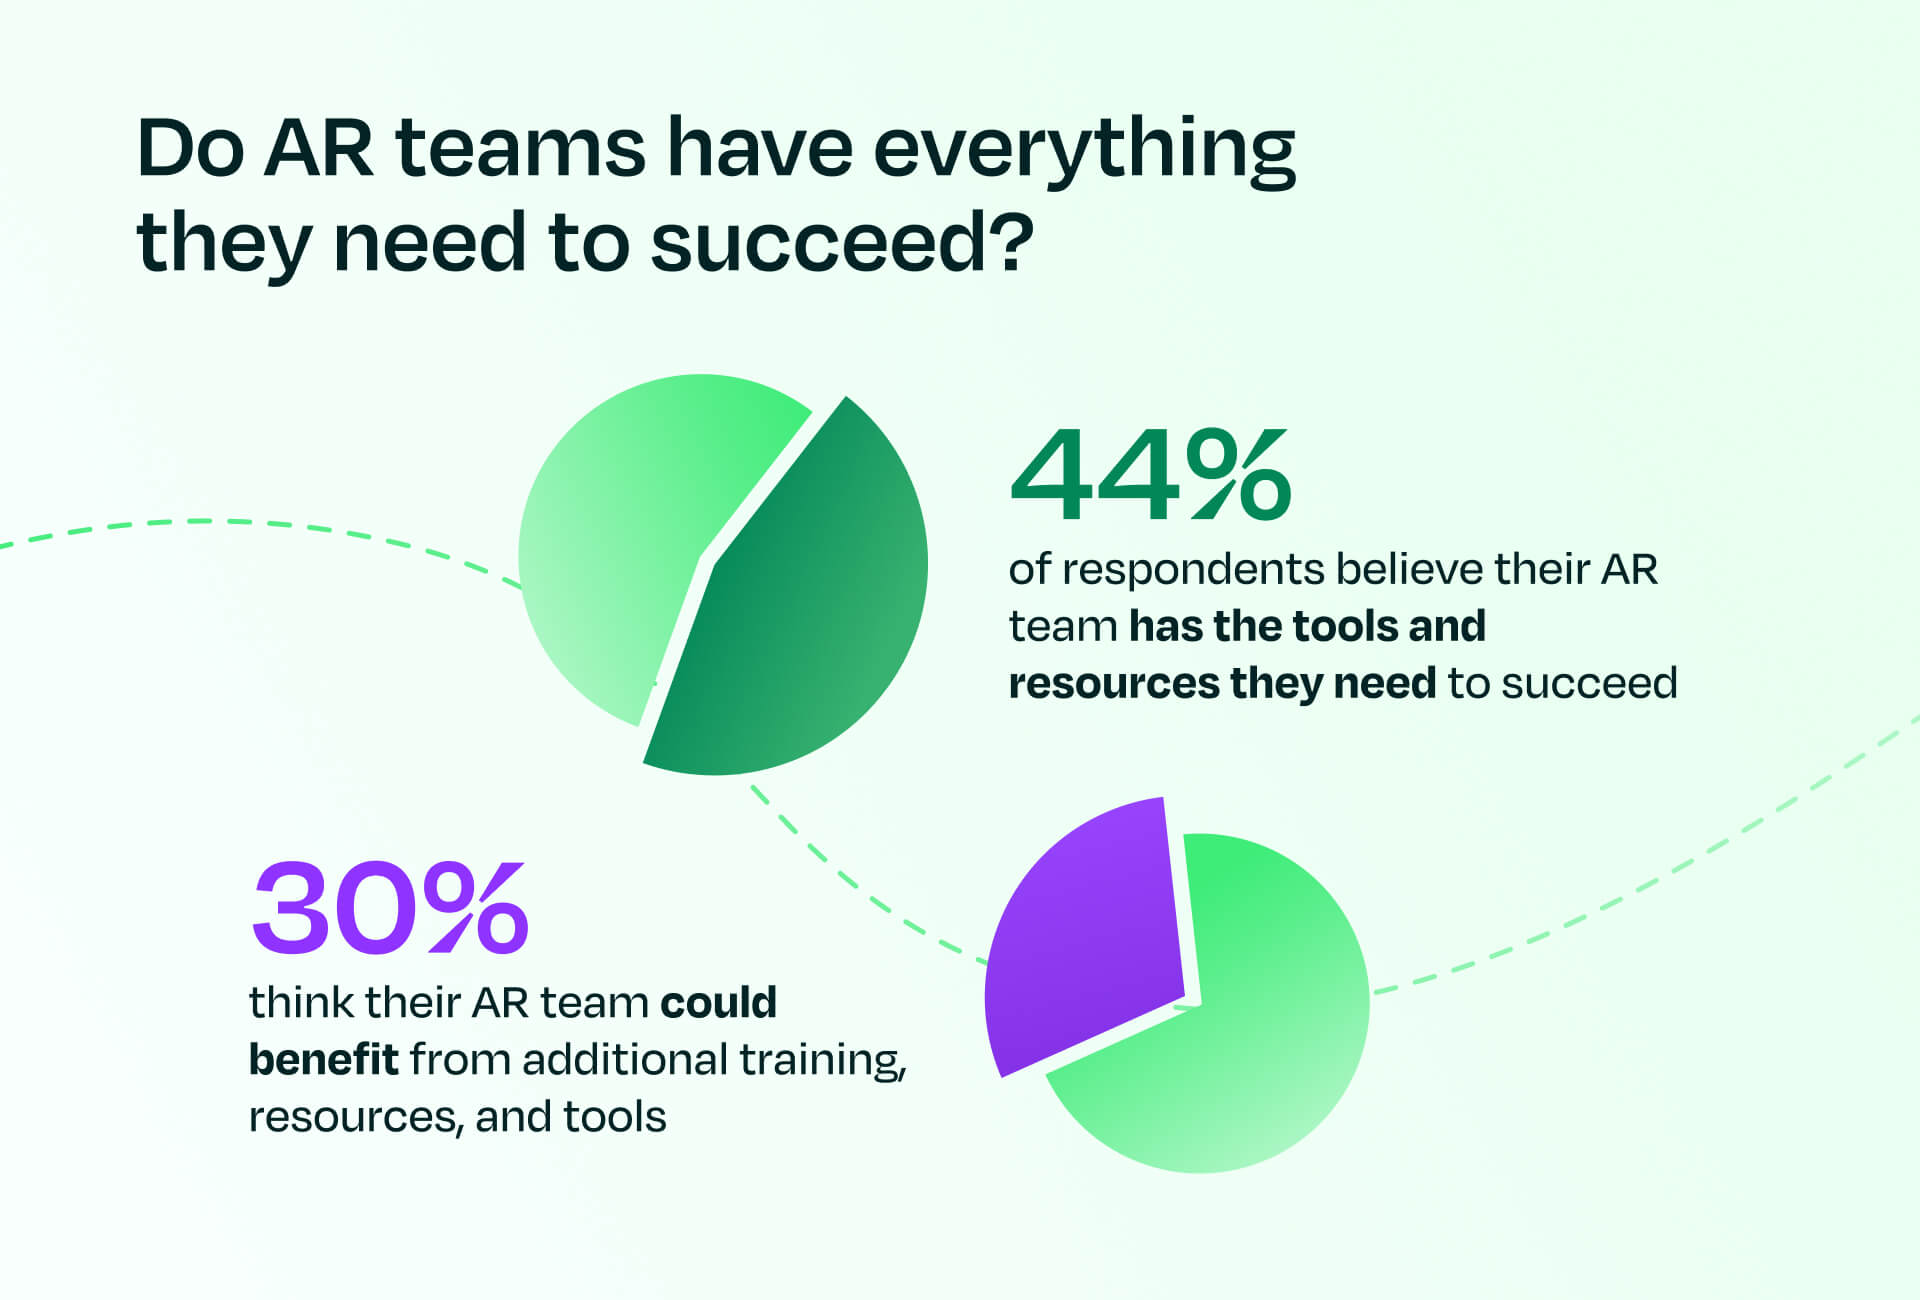 Do AR teams have everything they need to succeed stat chart